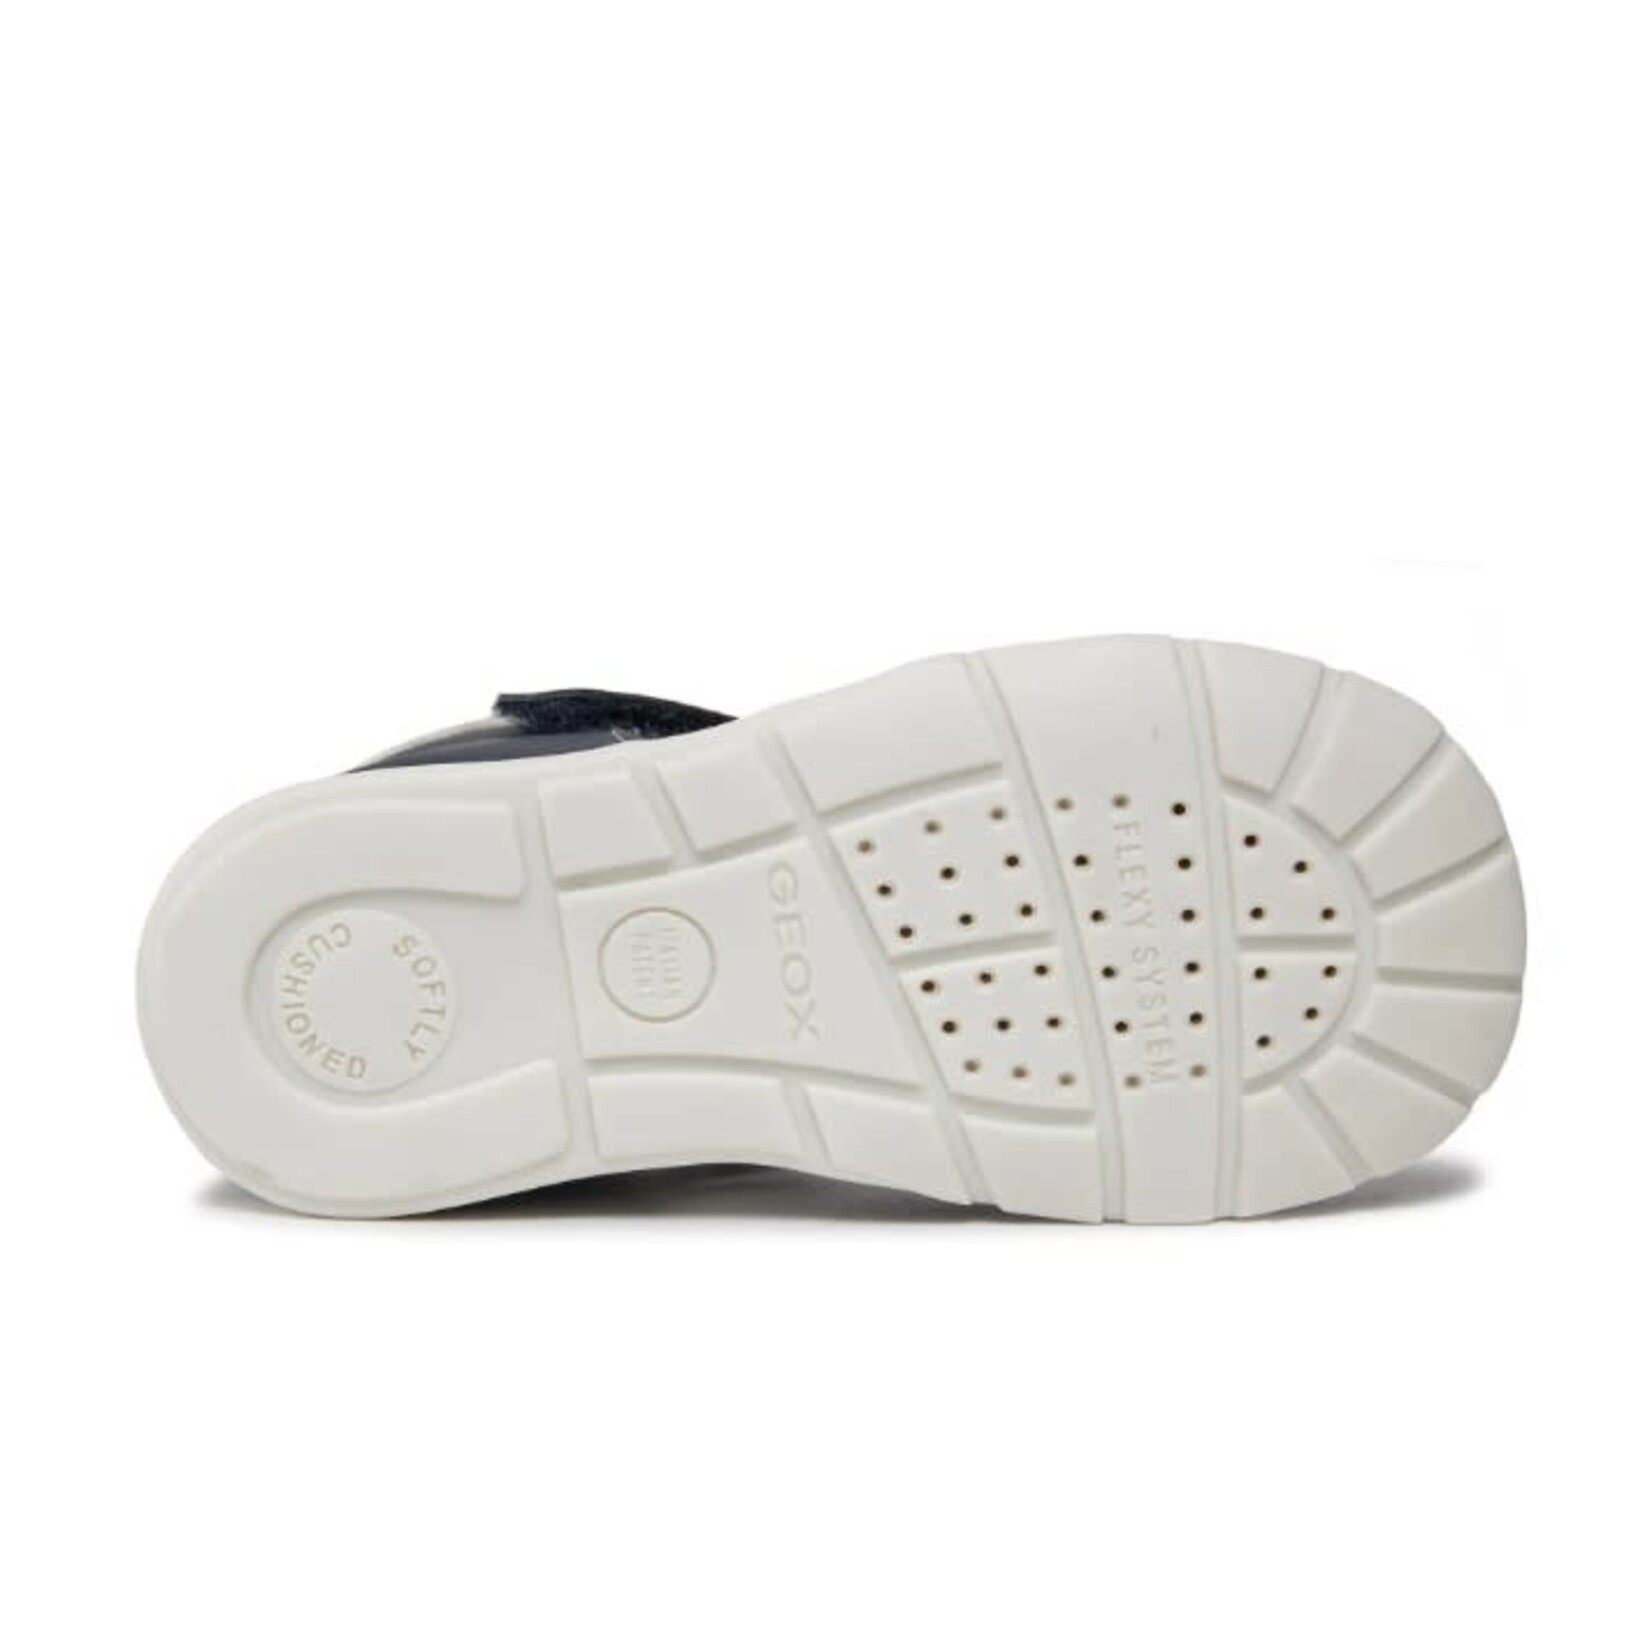 Geox GEOX - Closed-Toe First Steps Sandals 'Elthan - Navy/White'